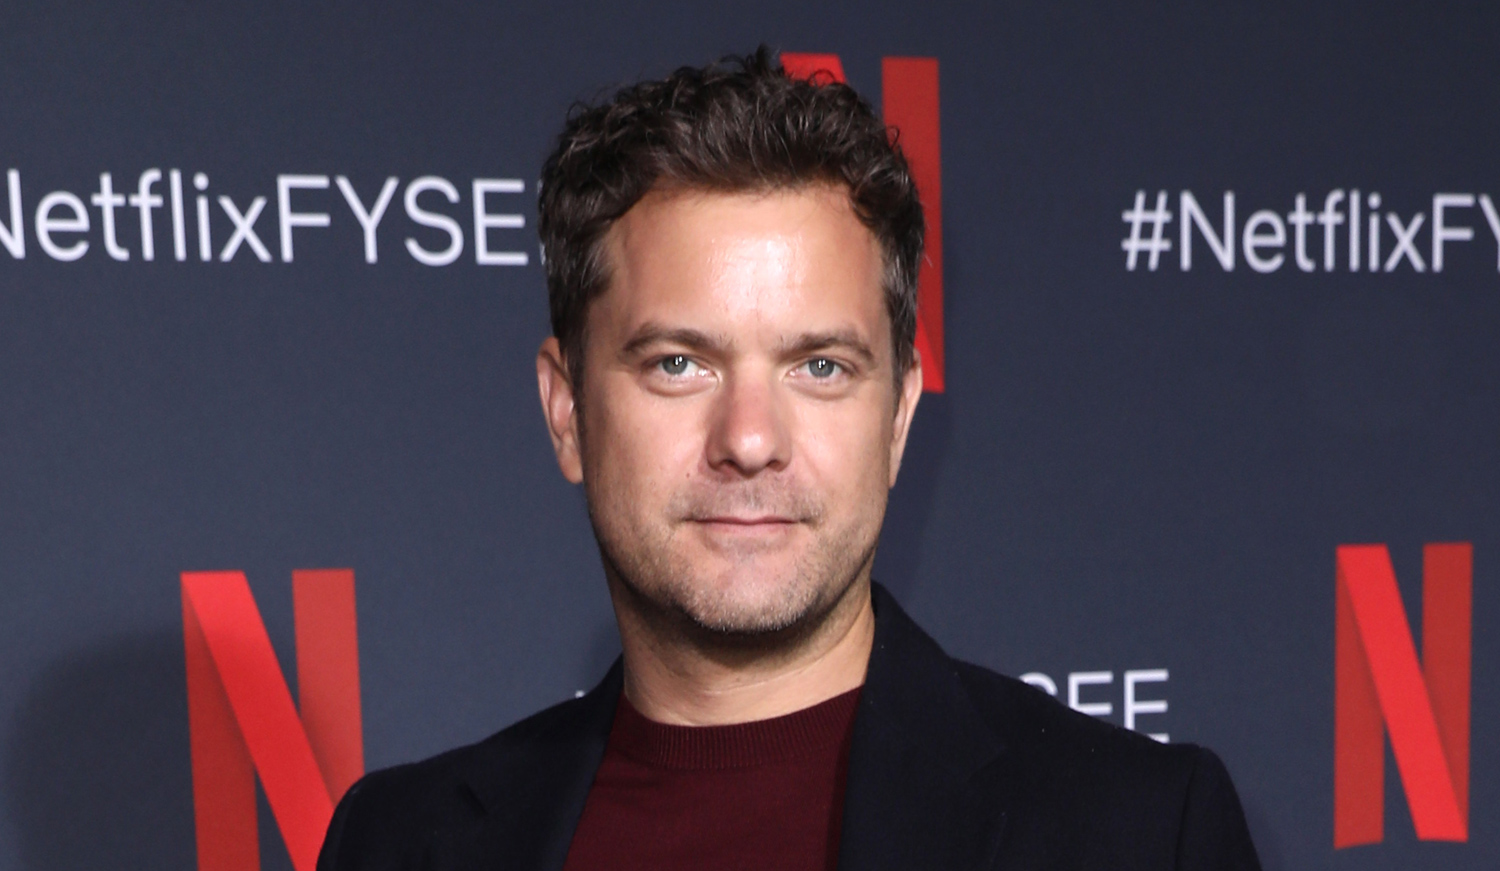 Joshua Jackson Reacts to ‘Dawson’s Creek’ Basketball in the Face Moment Going Viral, Responds to CGI Claims